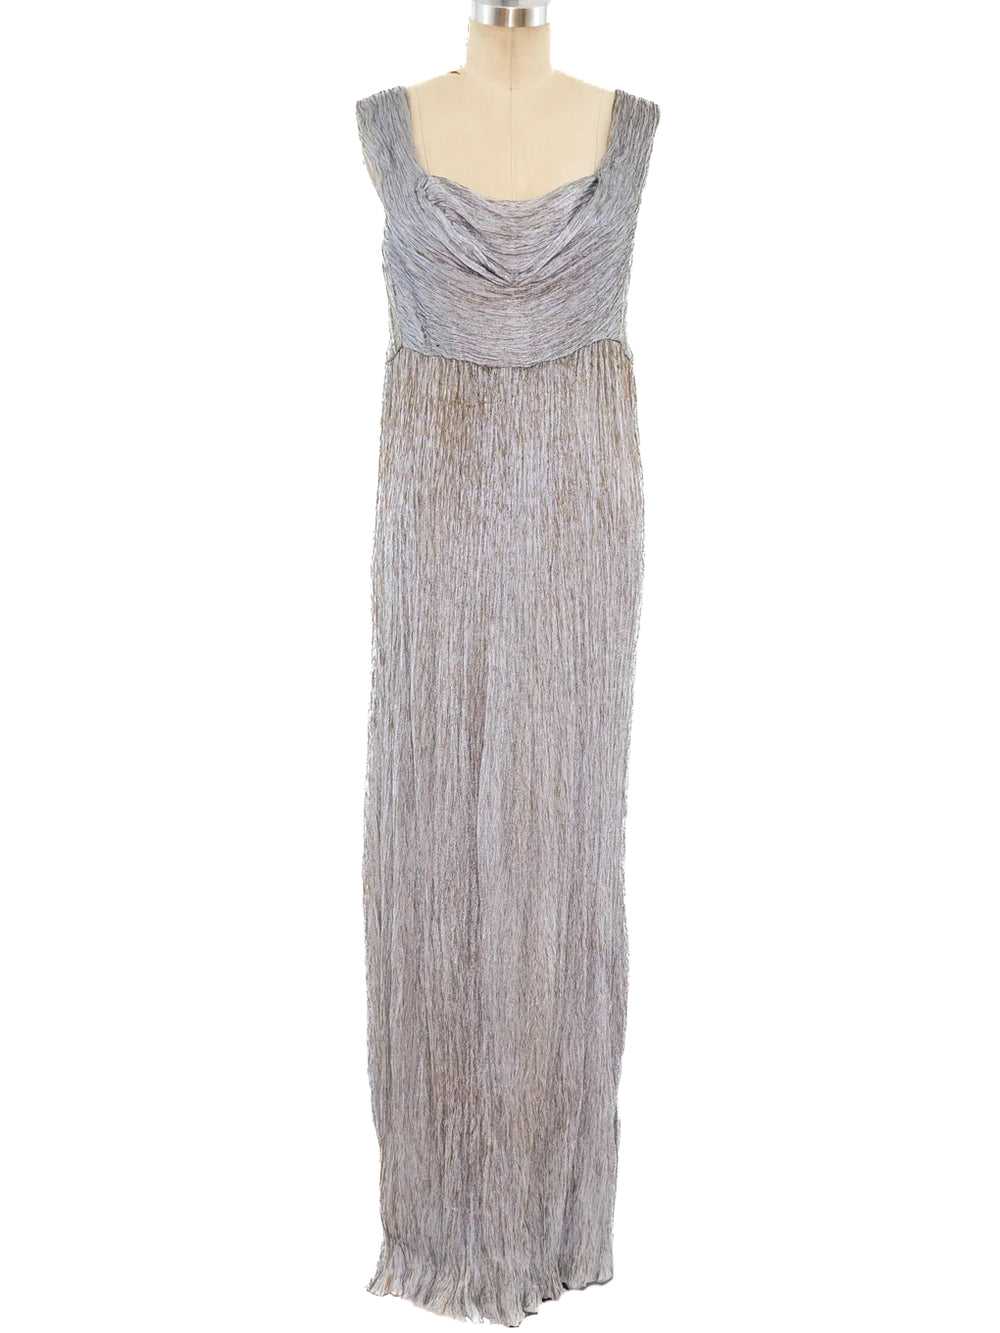 Zandra Rhodes Pleated Column Dress with Duster - image 6